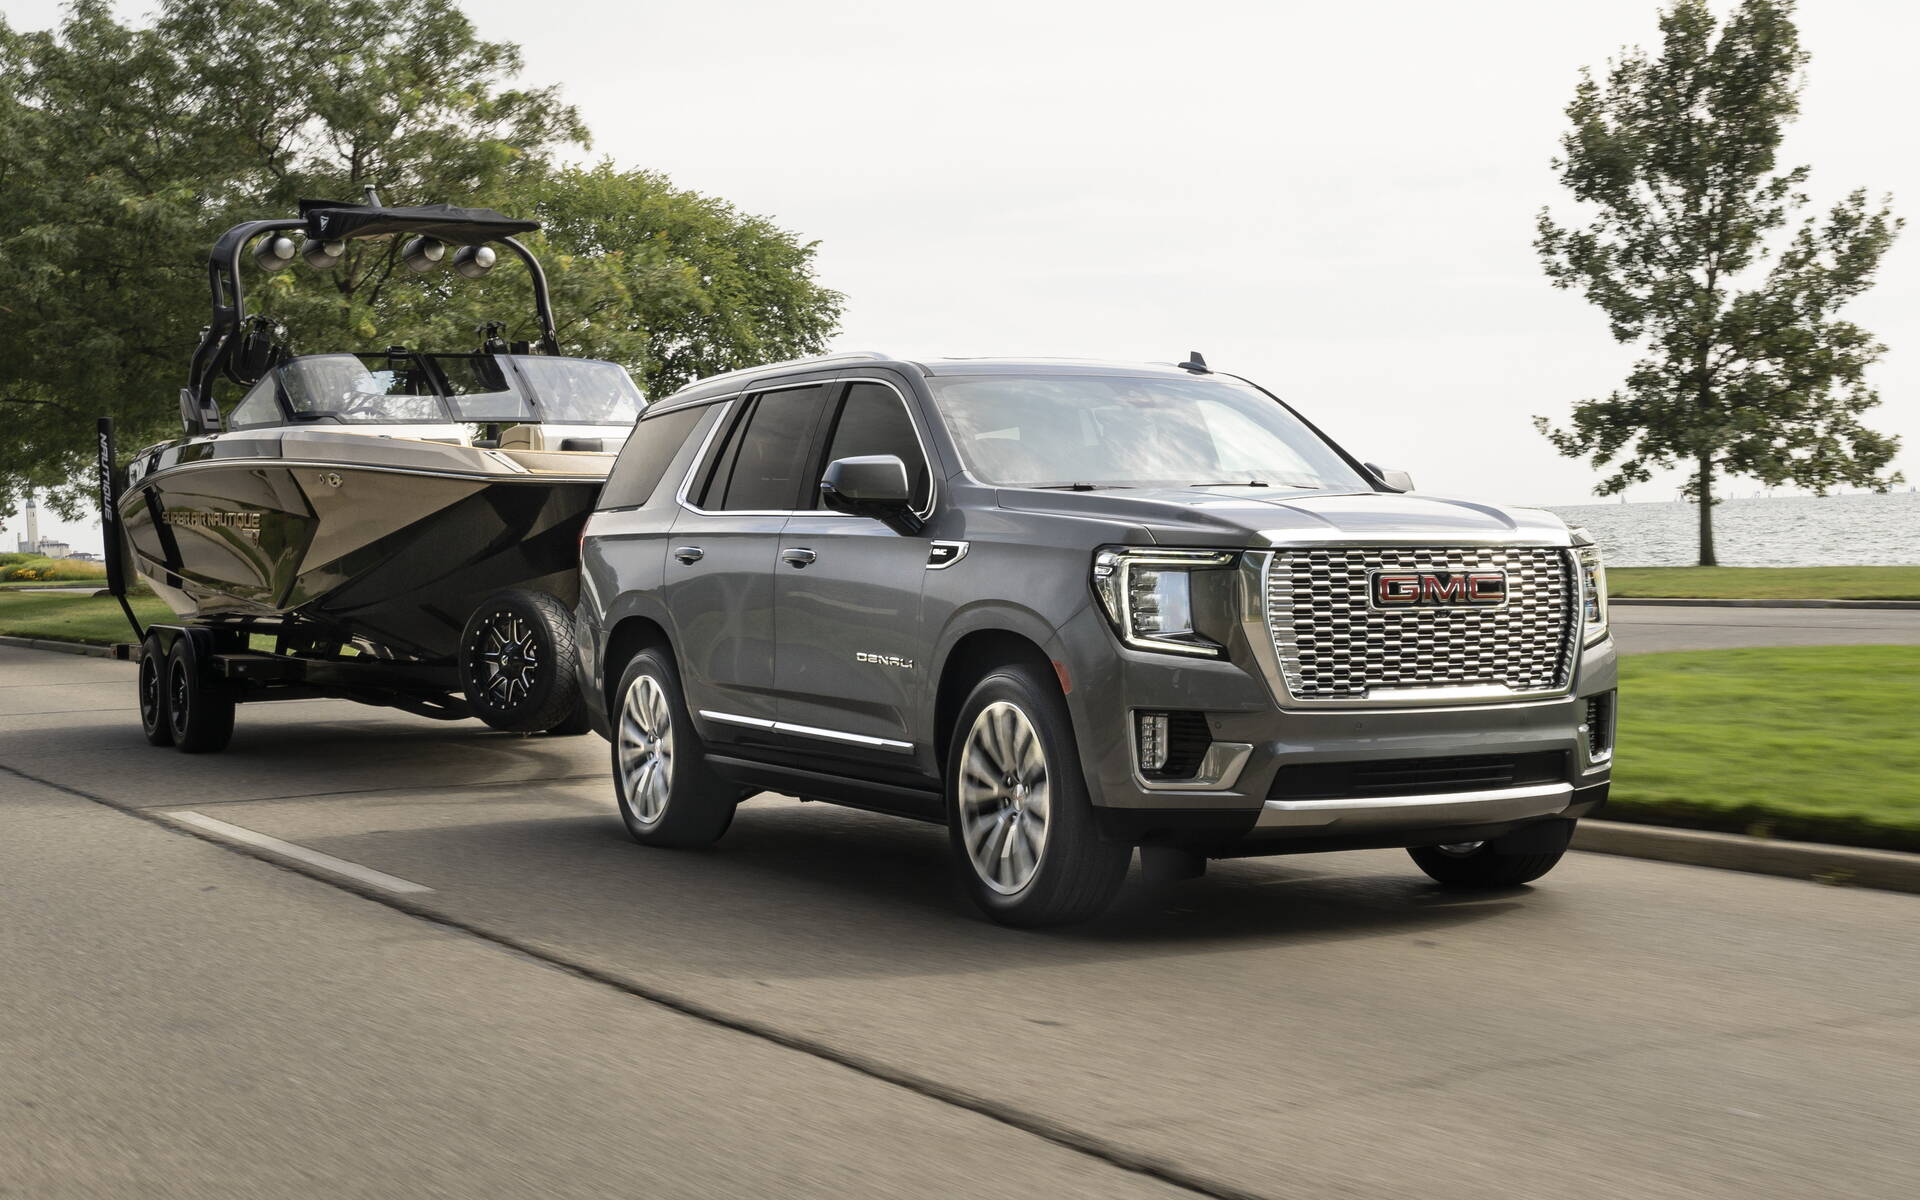 2021 Gmc Yukon Denali Price And Specifications The Car Guide